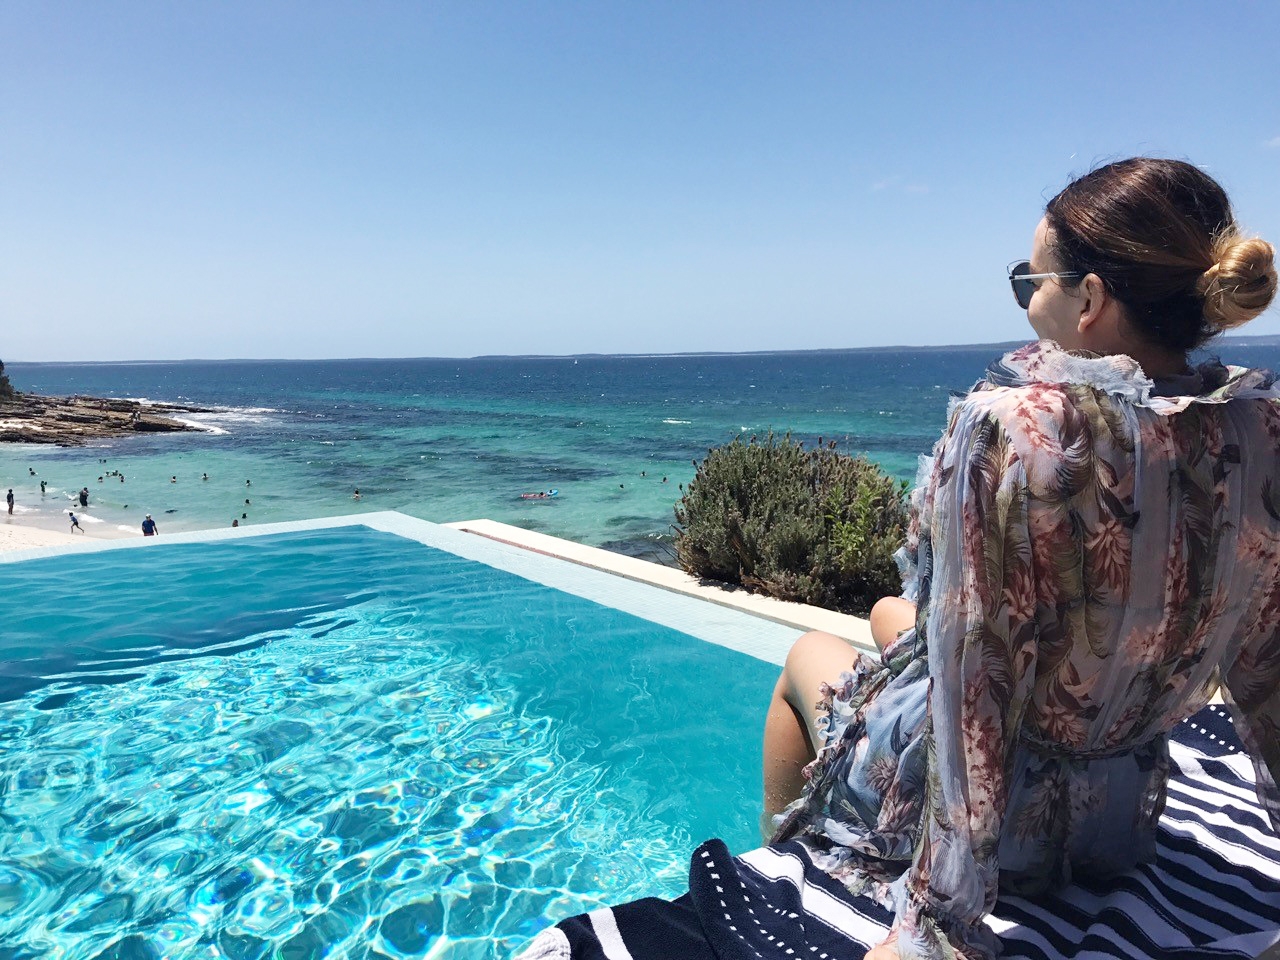 Marnie sitting by the pool, looking down at the turquoise sea below 